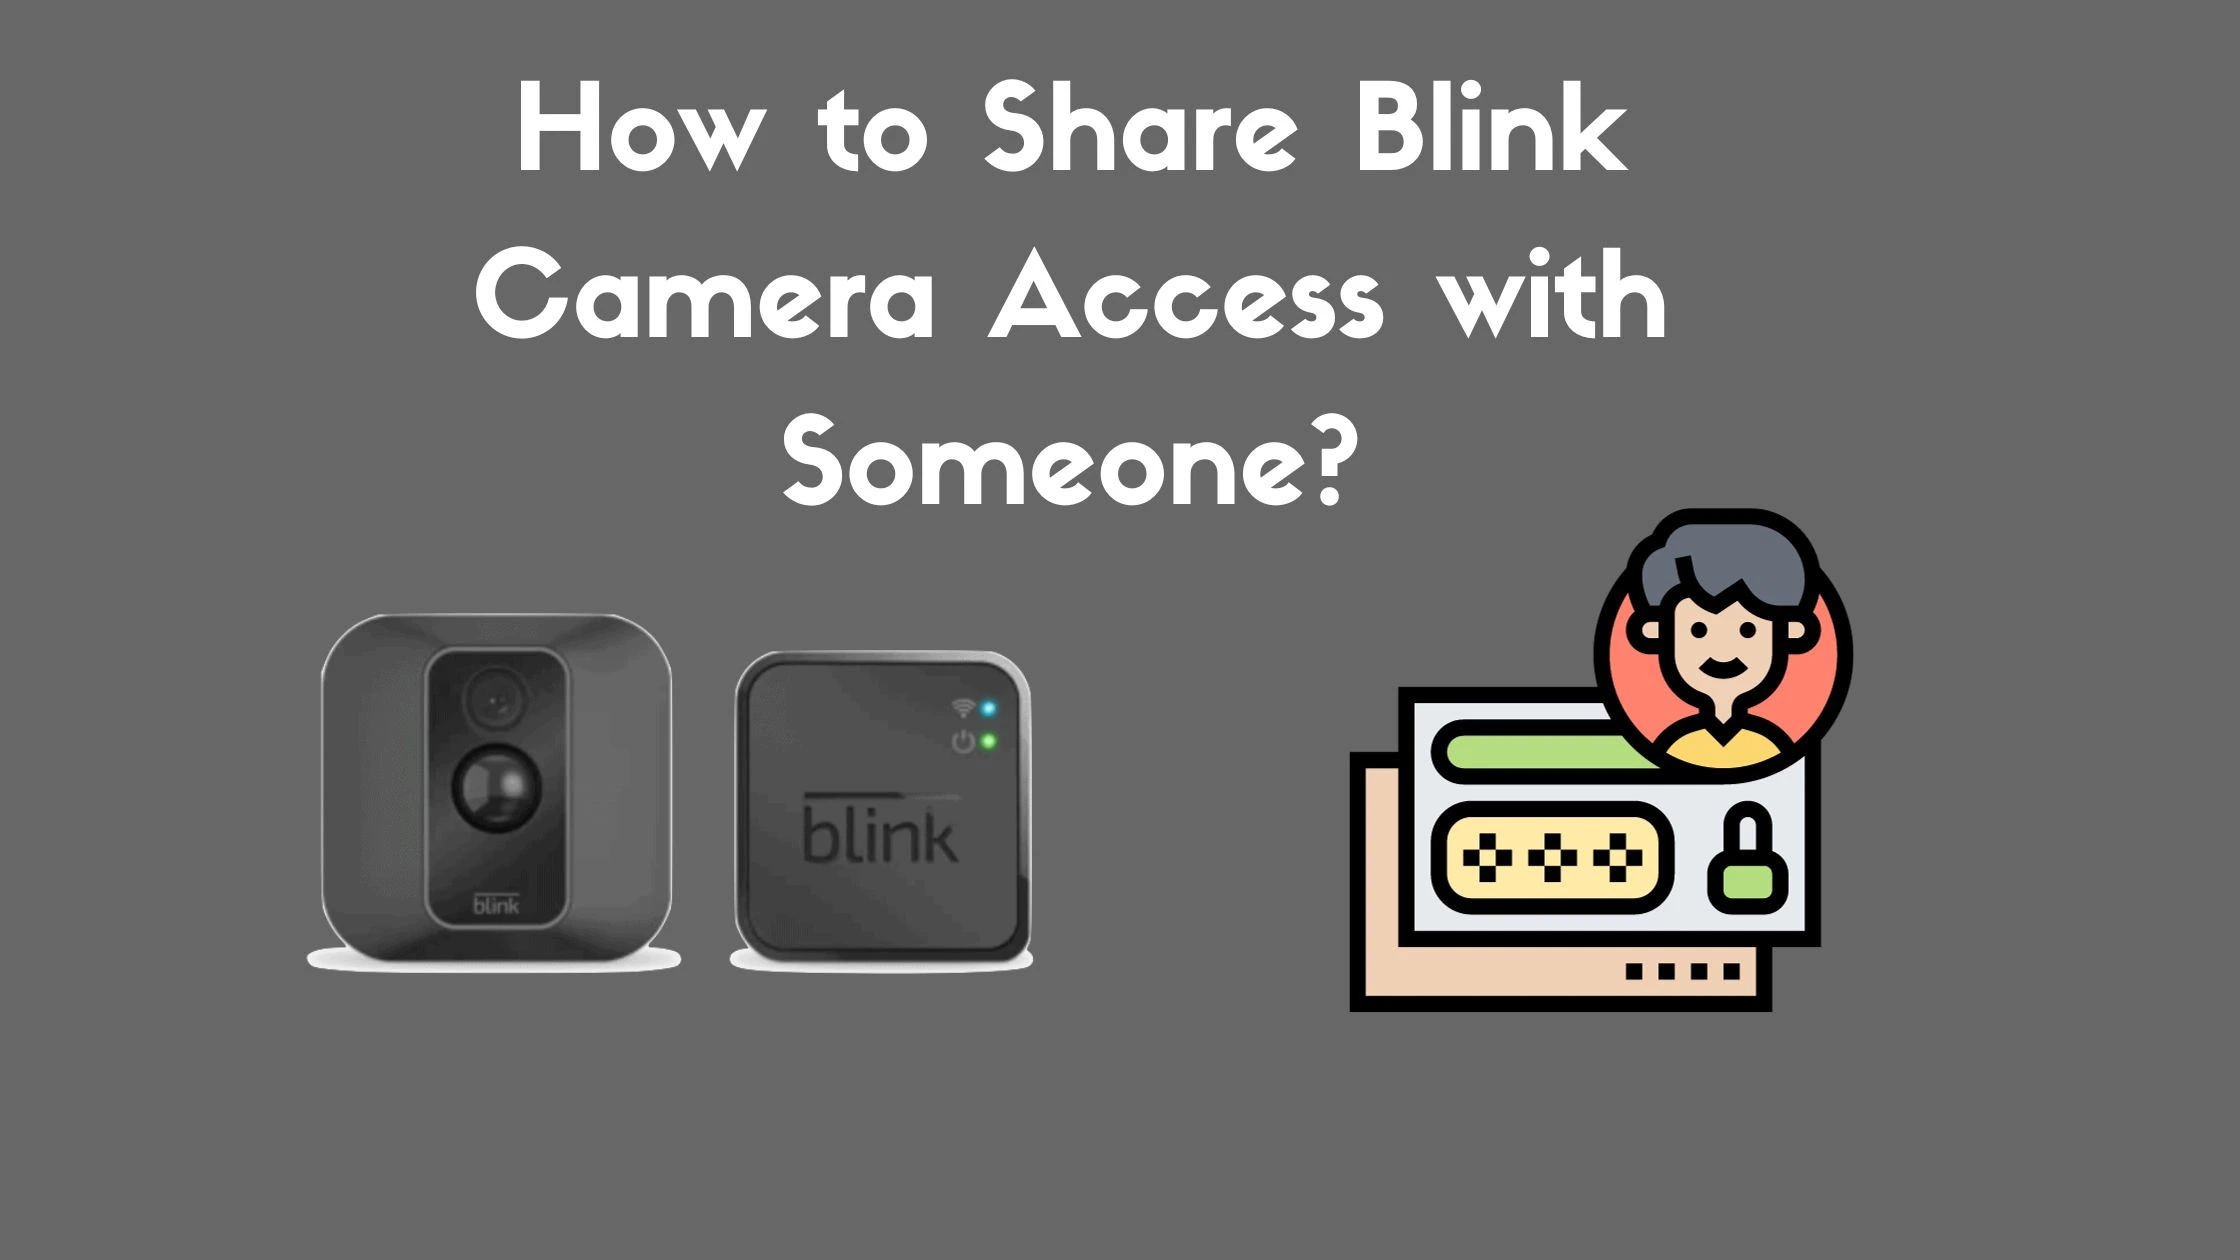 How to Share Blink Camera Access with Someone